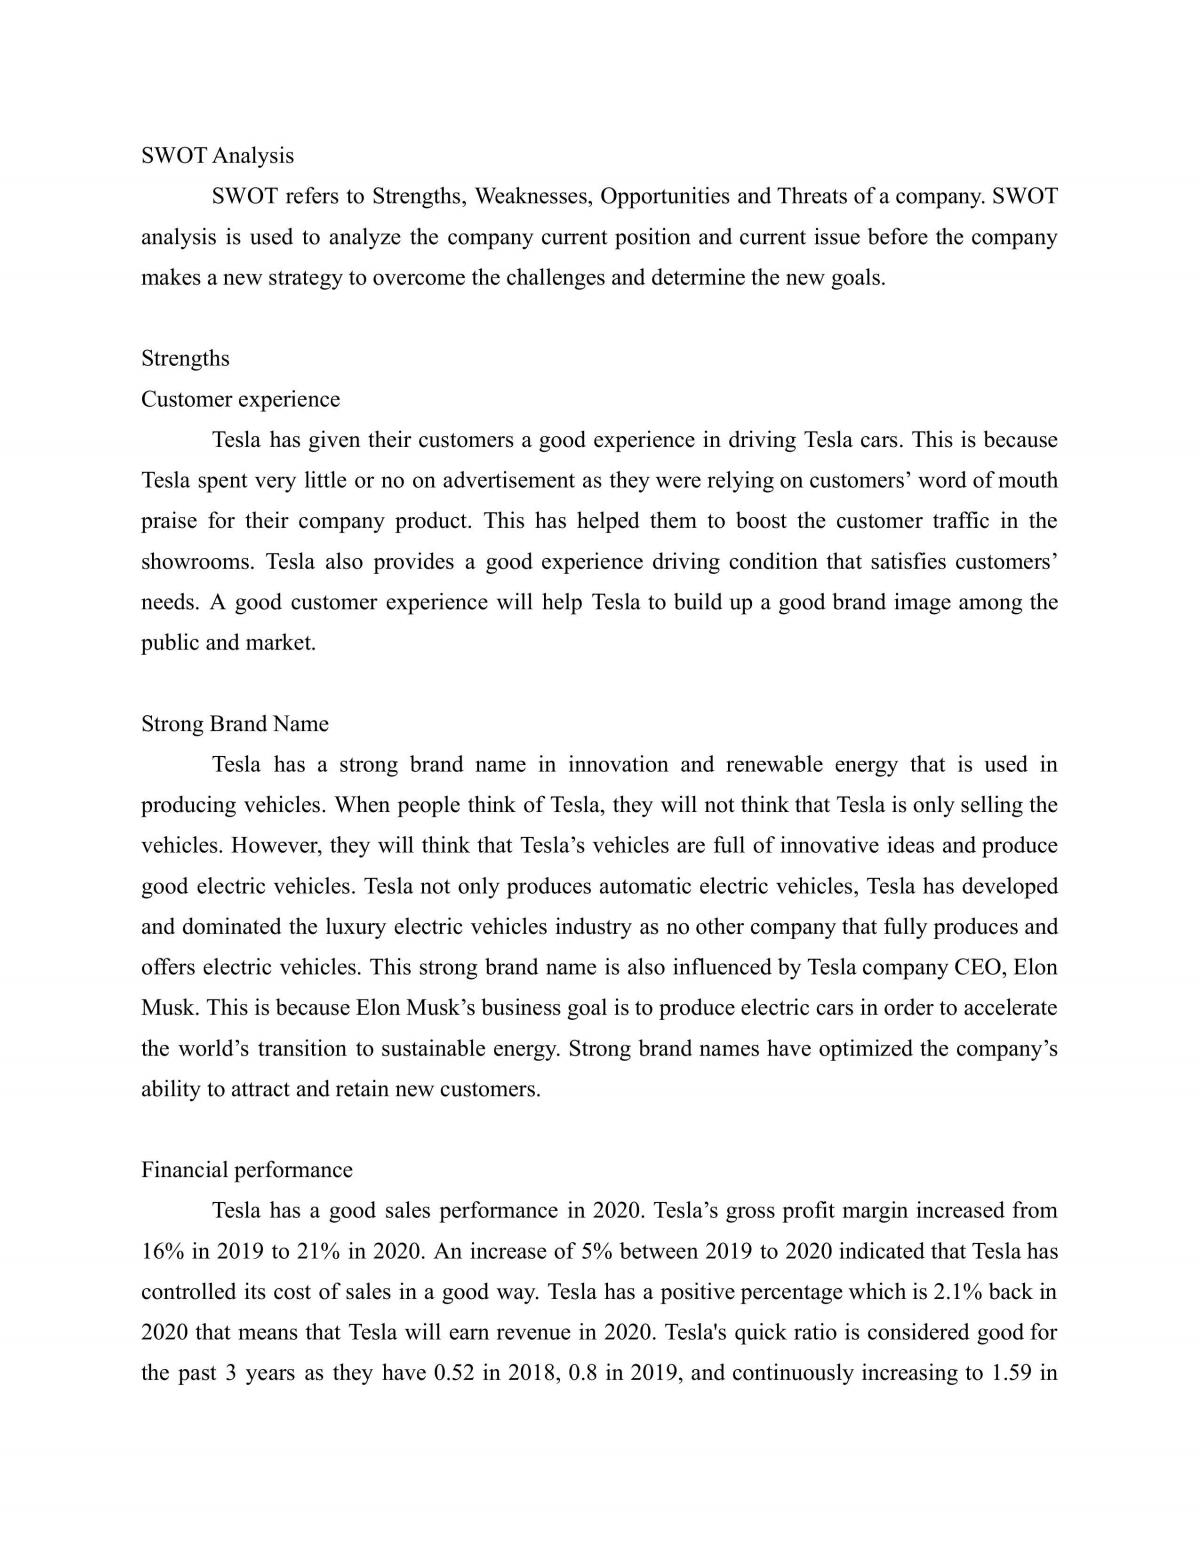 SWOT Analysis of Tesla and the Risk that will happen and the recommendation to solve the risk - Page 1